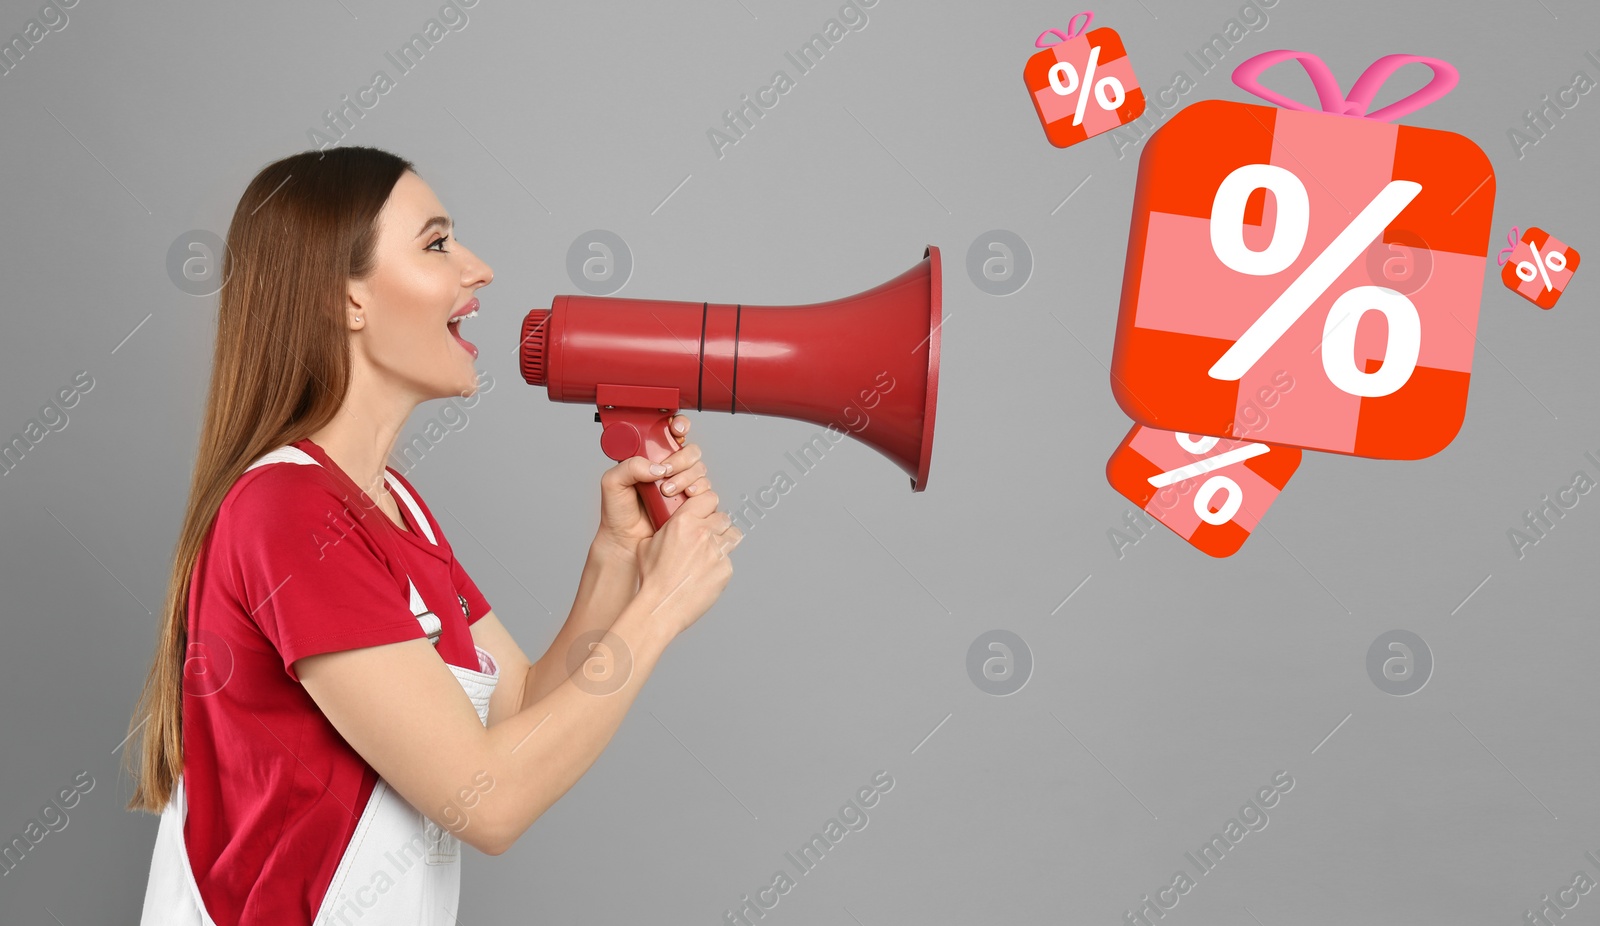 Image of Discount offer. Woman shouting into megaphone on grey background. Gift boxes with percent signs coming out from device